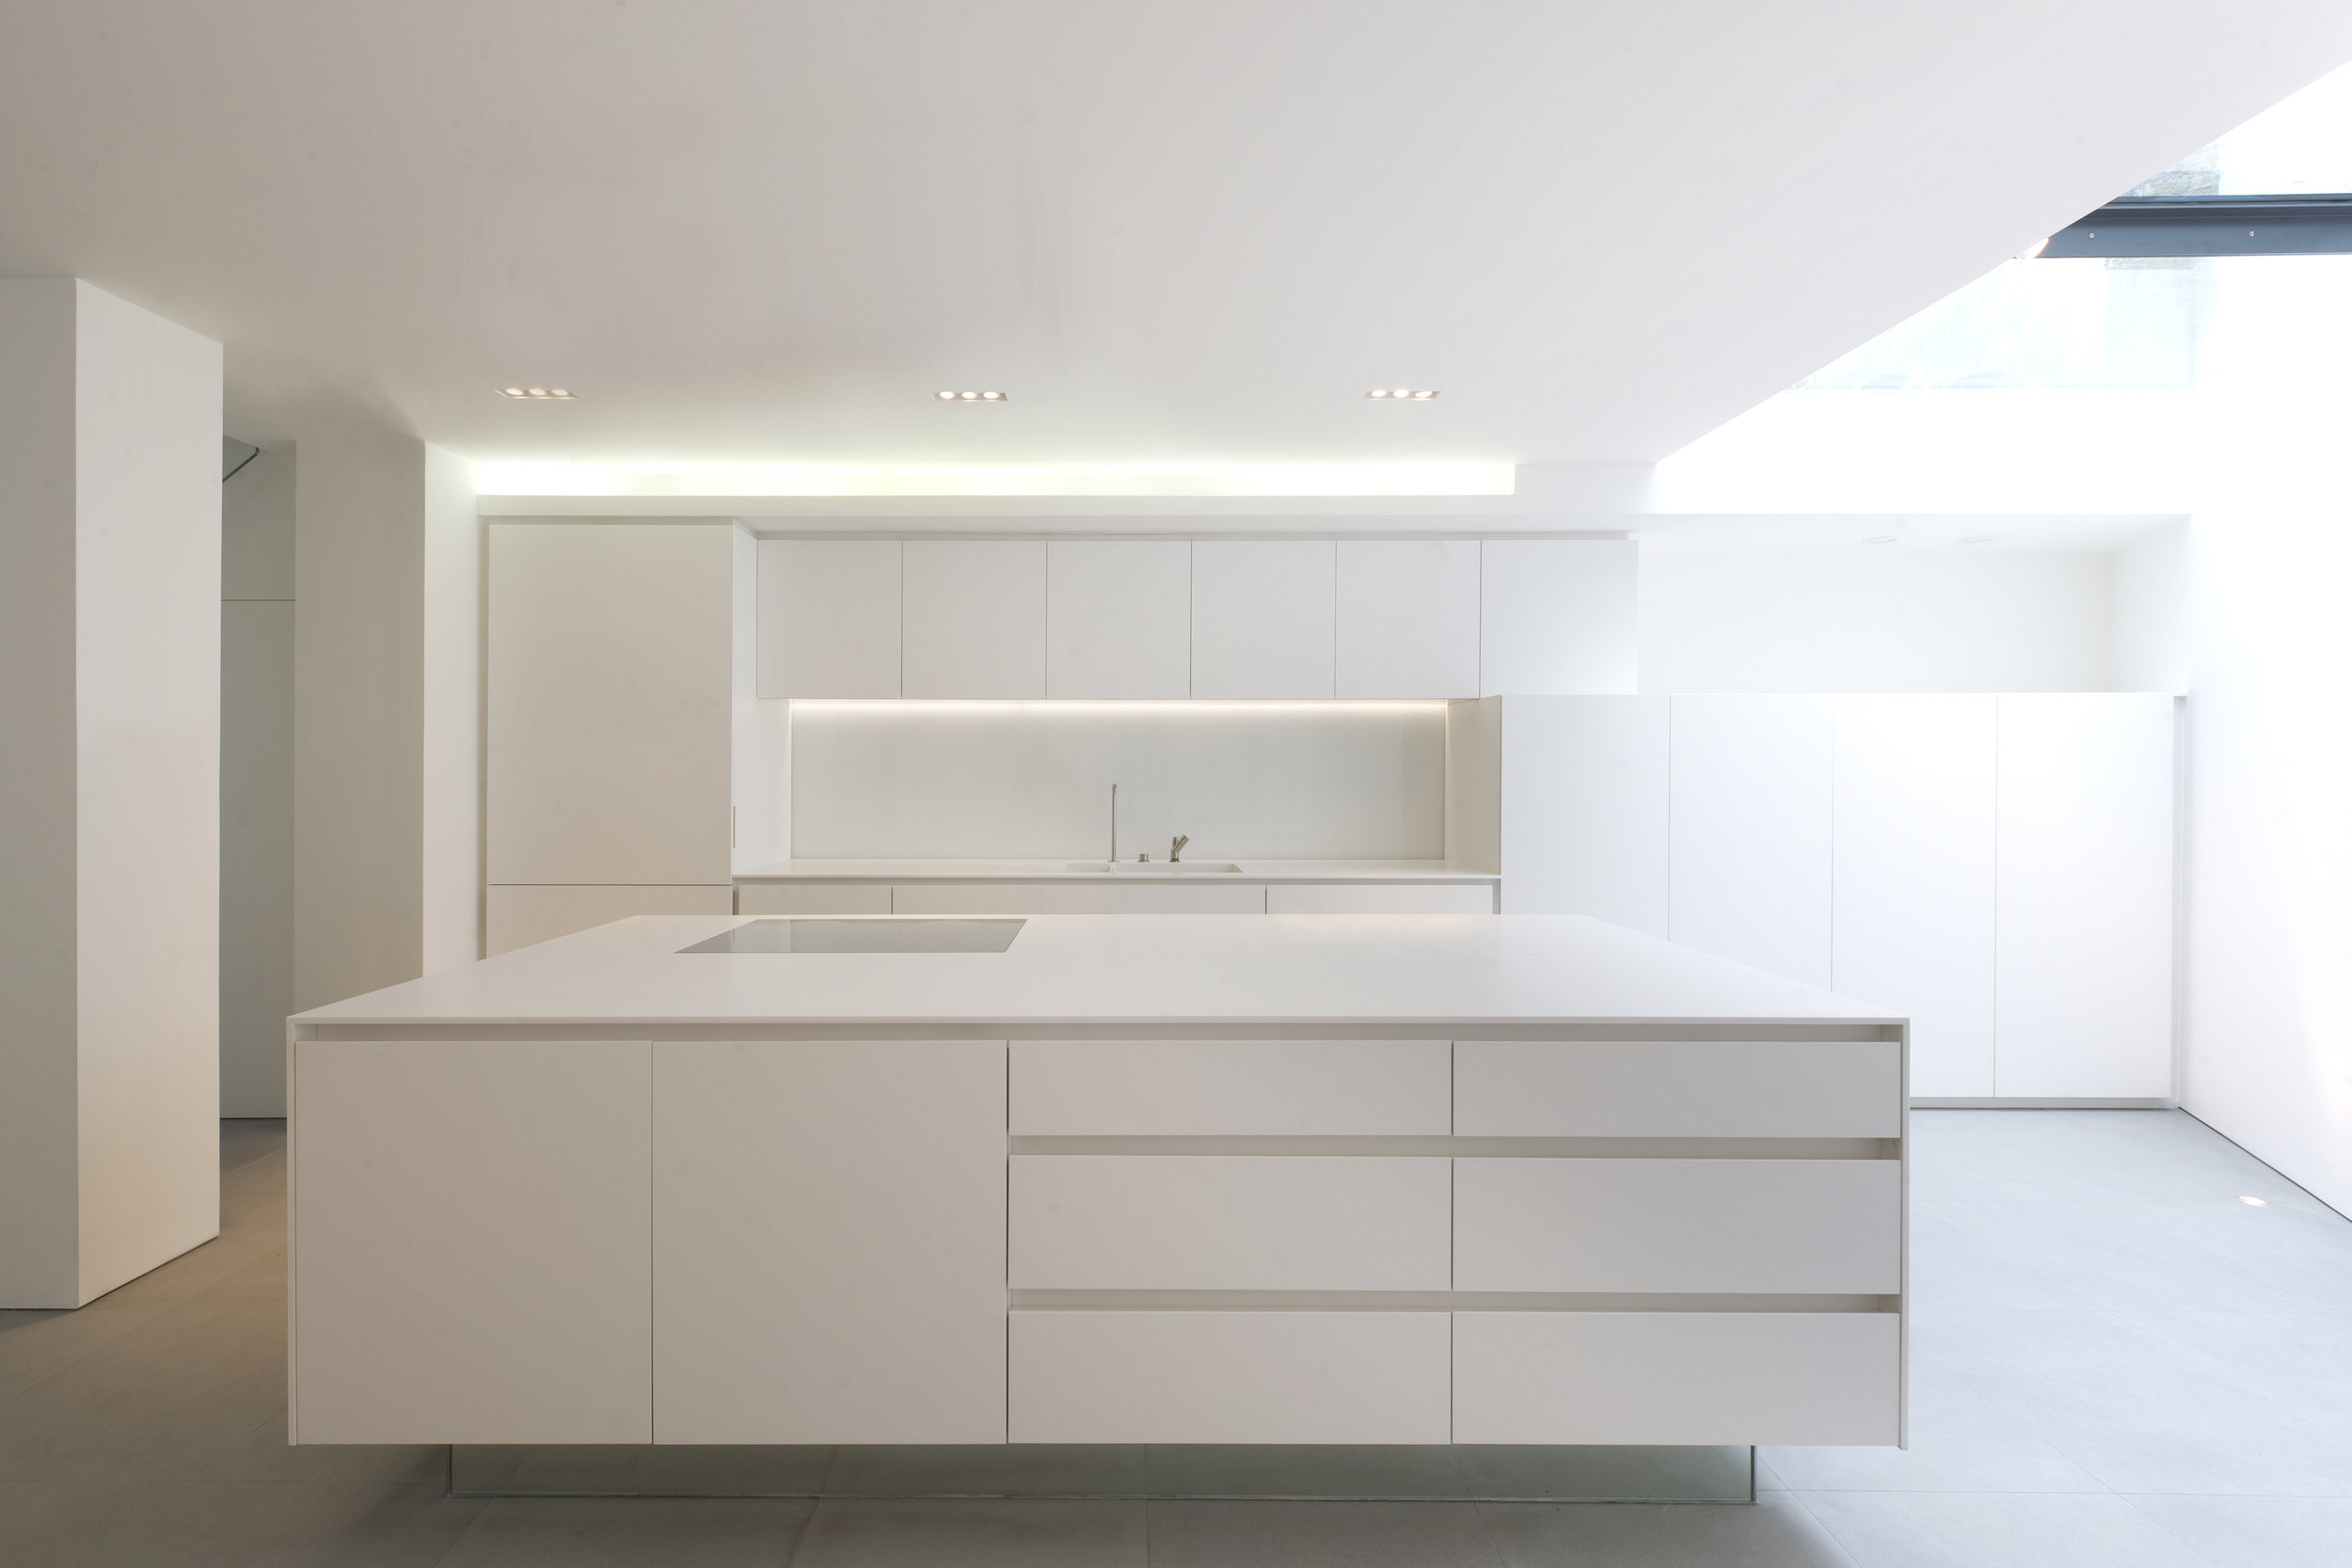 full renovation townhouse in the heart of Kensington including bespoke kitchen and stairs by minimalist London architect practice Thompson + Baroni